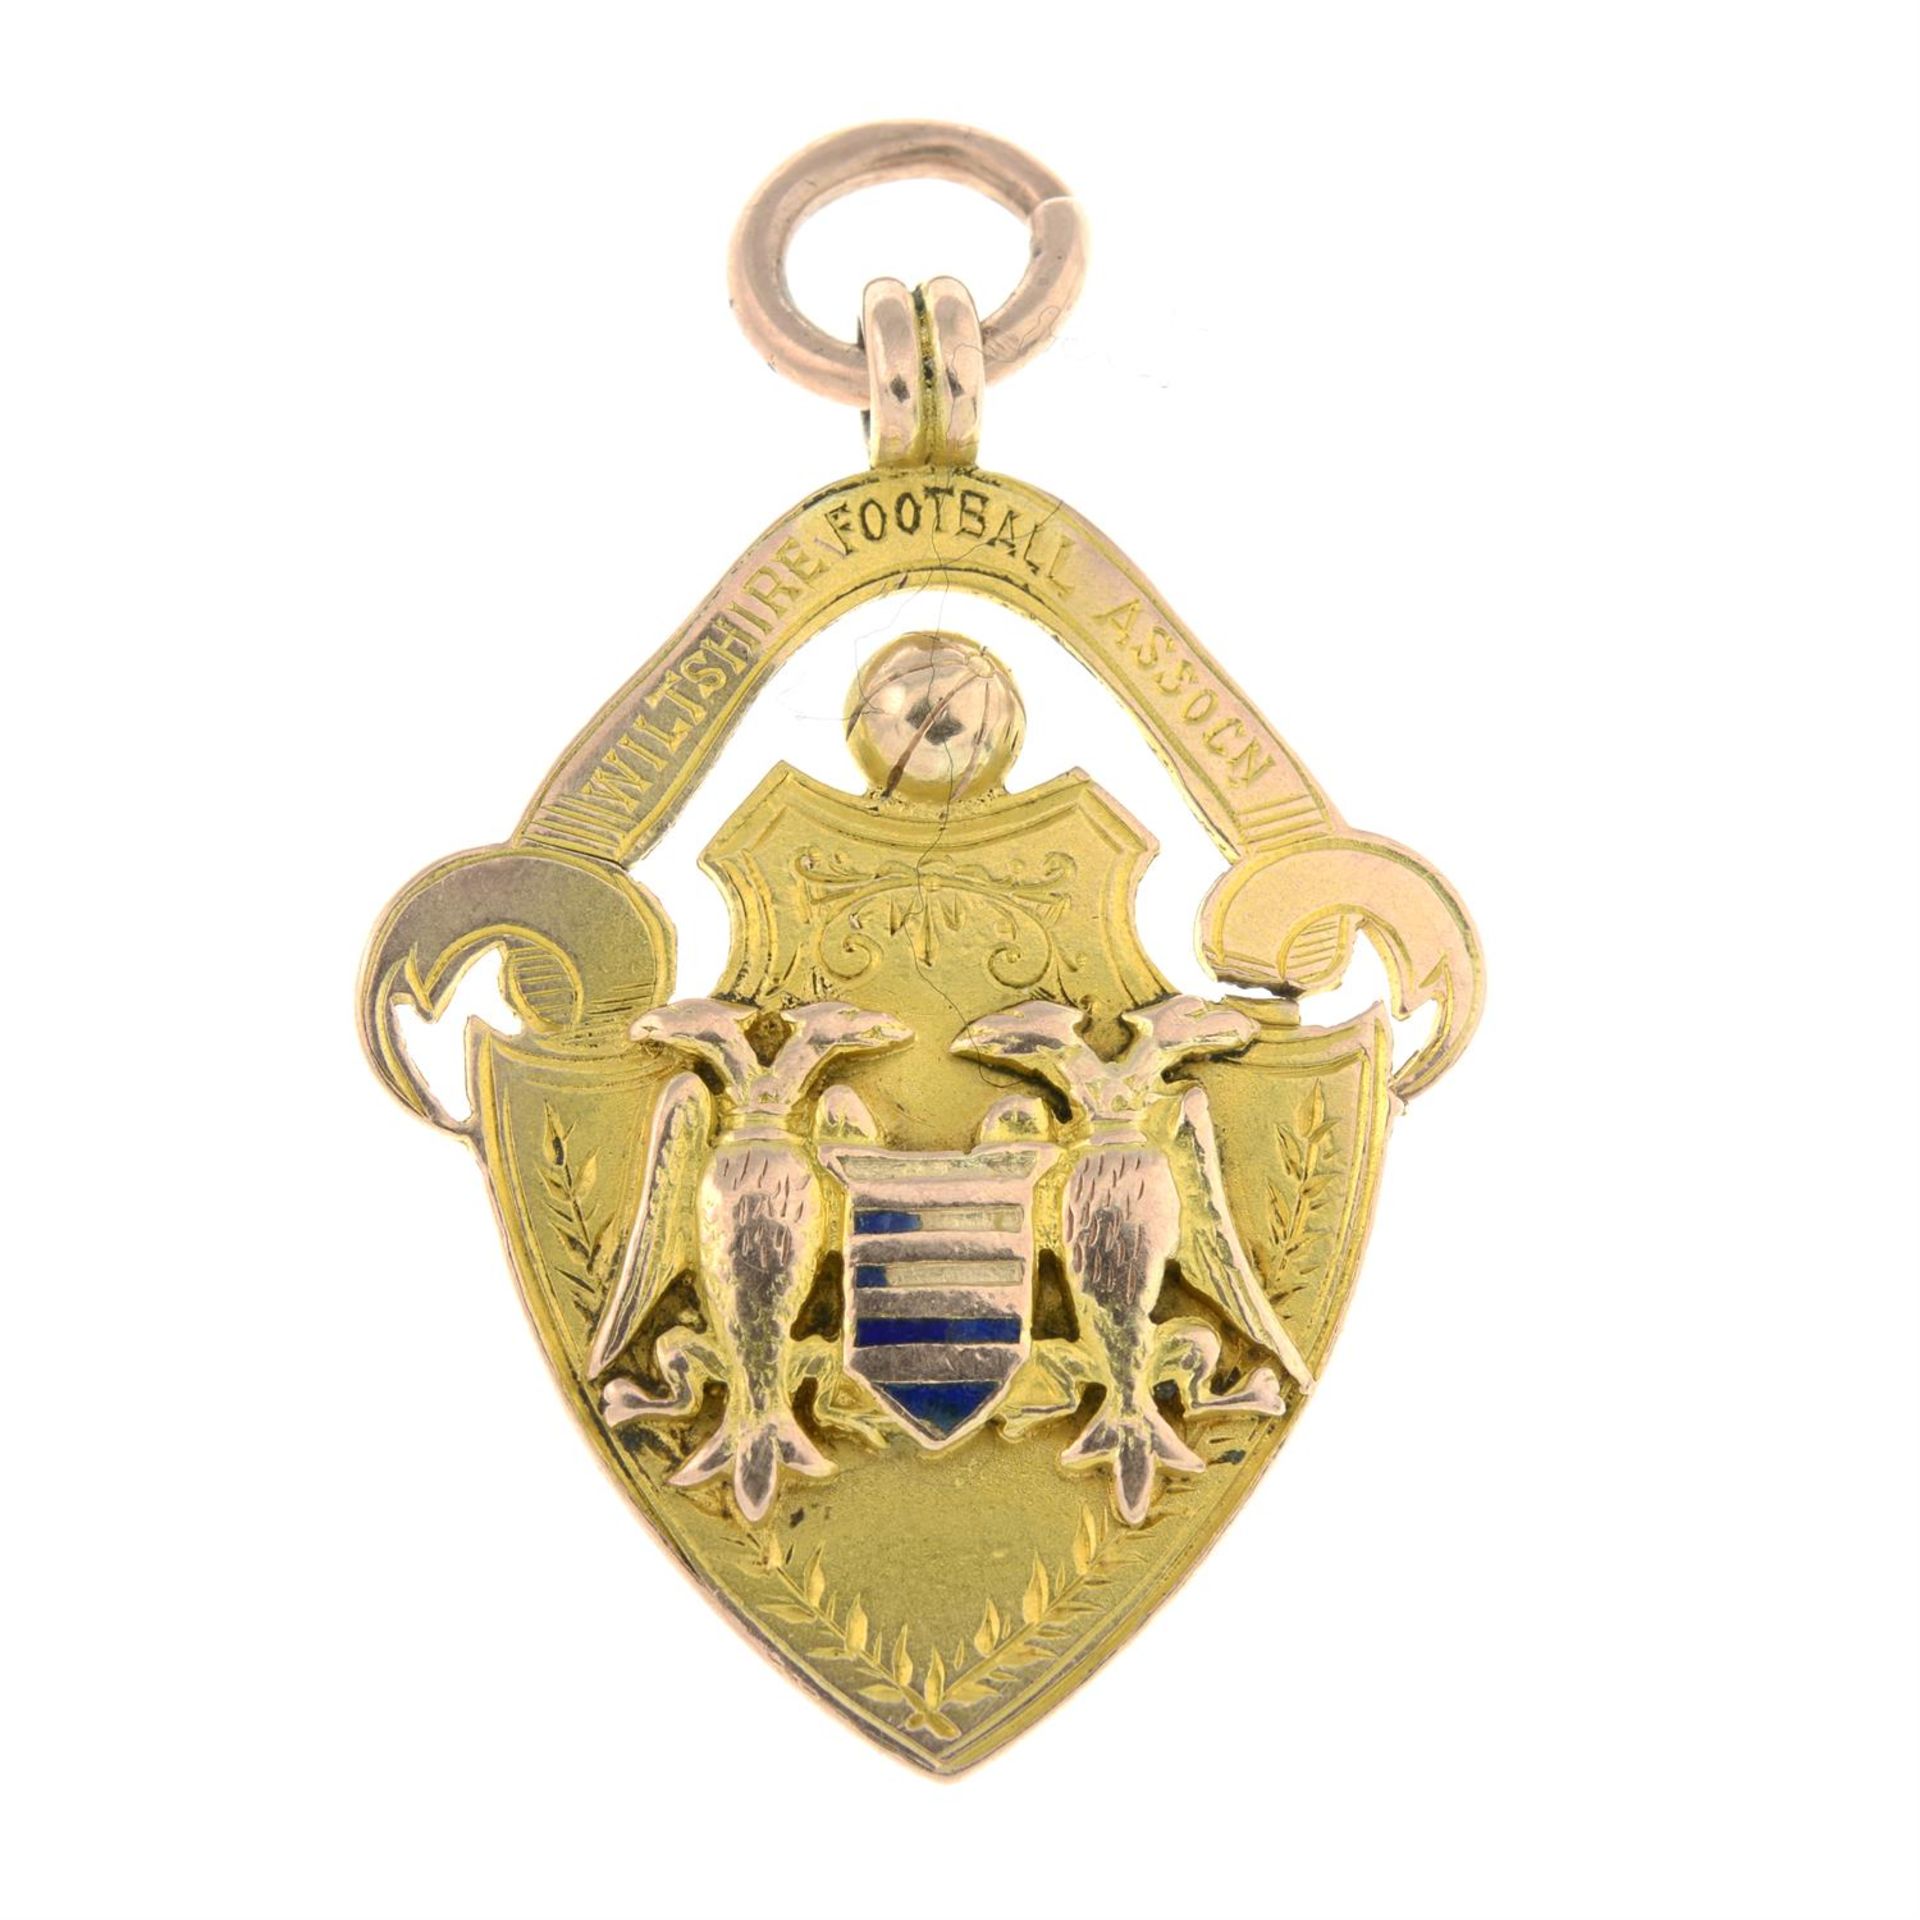 An early 20th century 9ct gold 'Wiltshire Football Association' enamel medallion pendant.